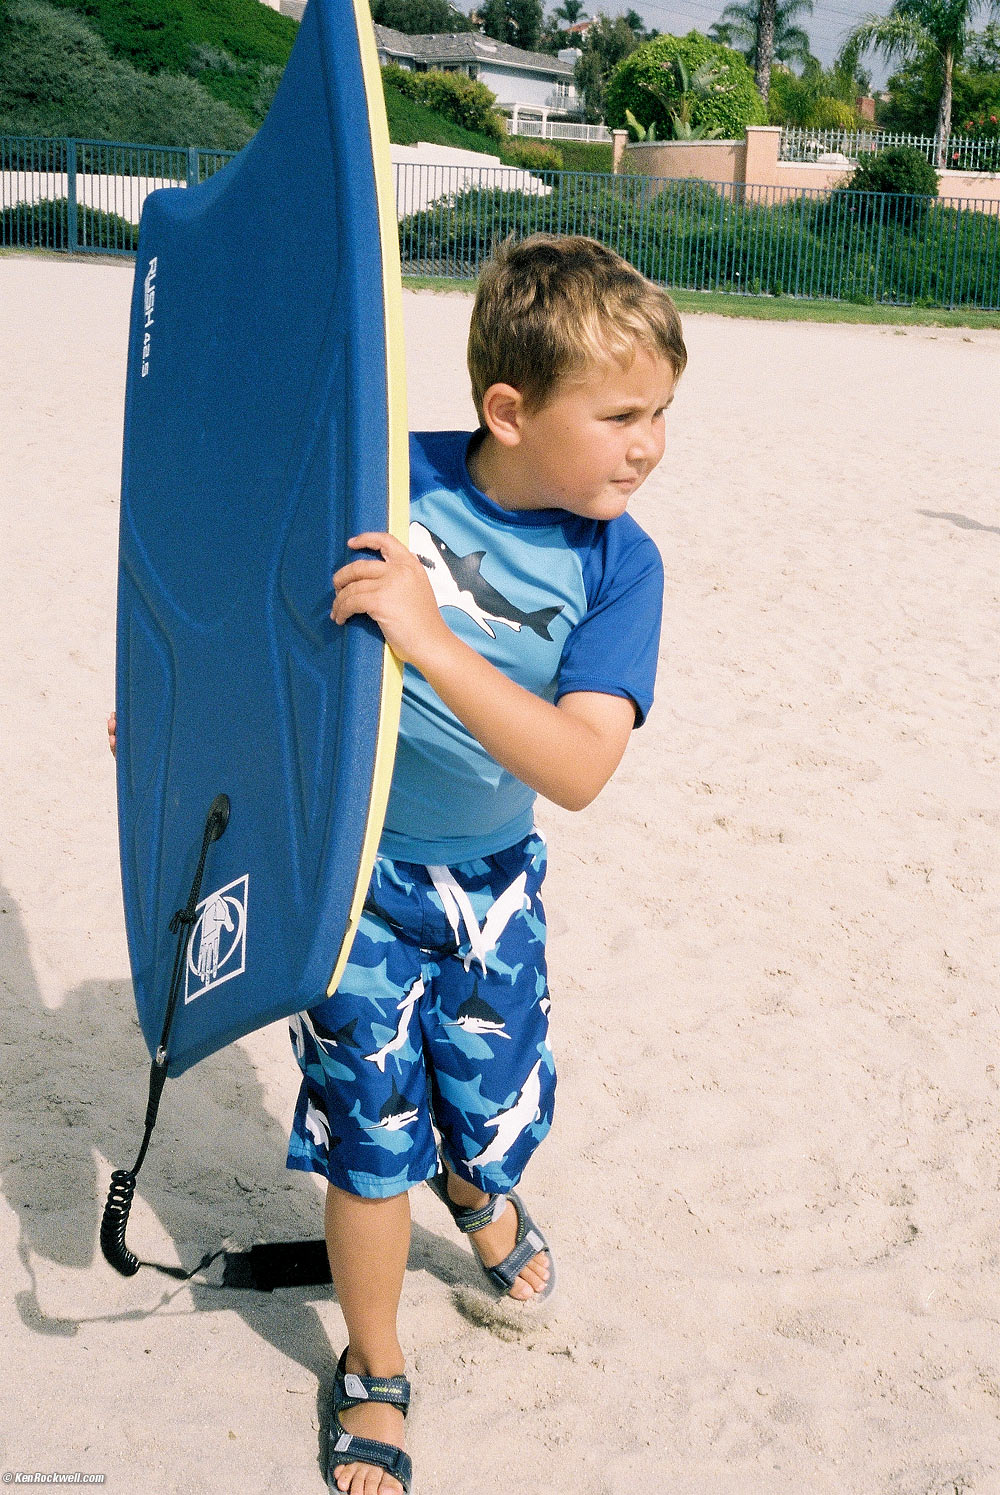 Ryan and his boogie board at Lake Mission Viejo